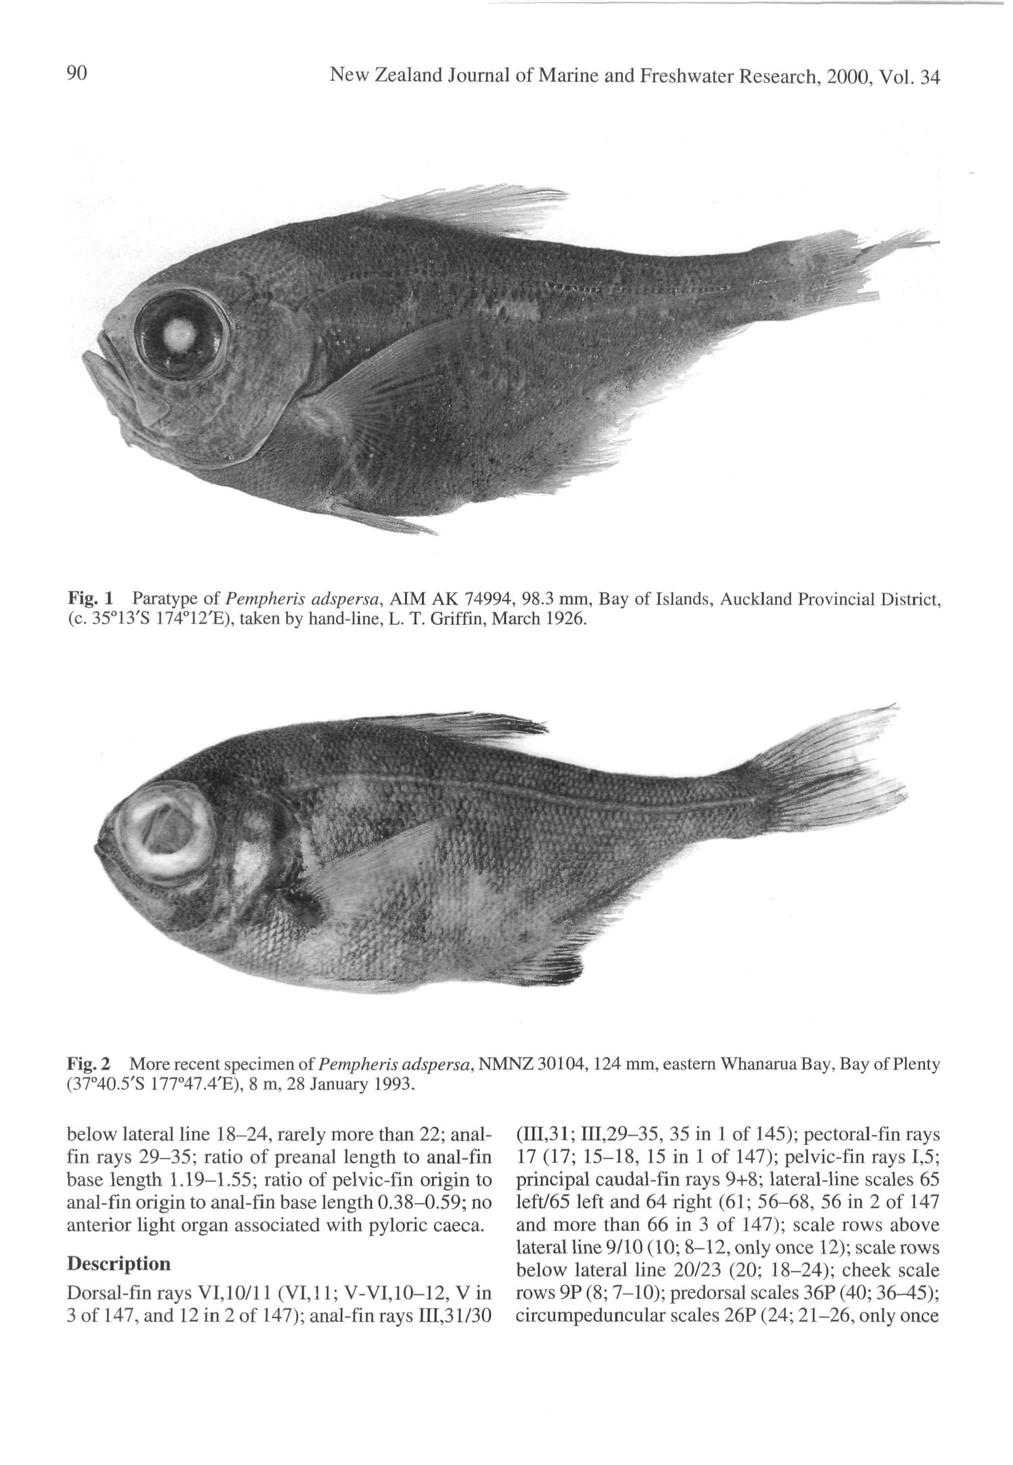 90 New Zealand Journal of Marine and Freshwater Research, 2000, Vol. 34 Fig. 1 Paratype of Pempheris adspersa, AIM AK 74994, 98.3 mm, Bay of Islands, Auckland Provincial District, (c.